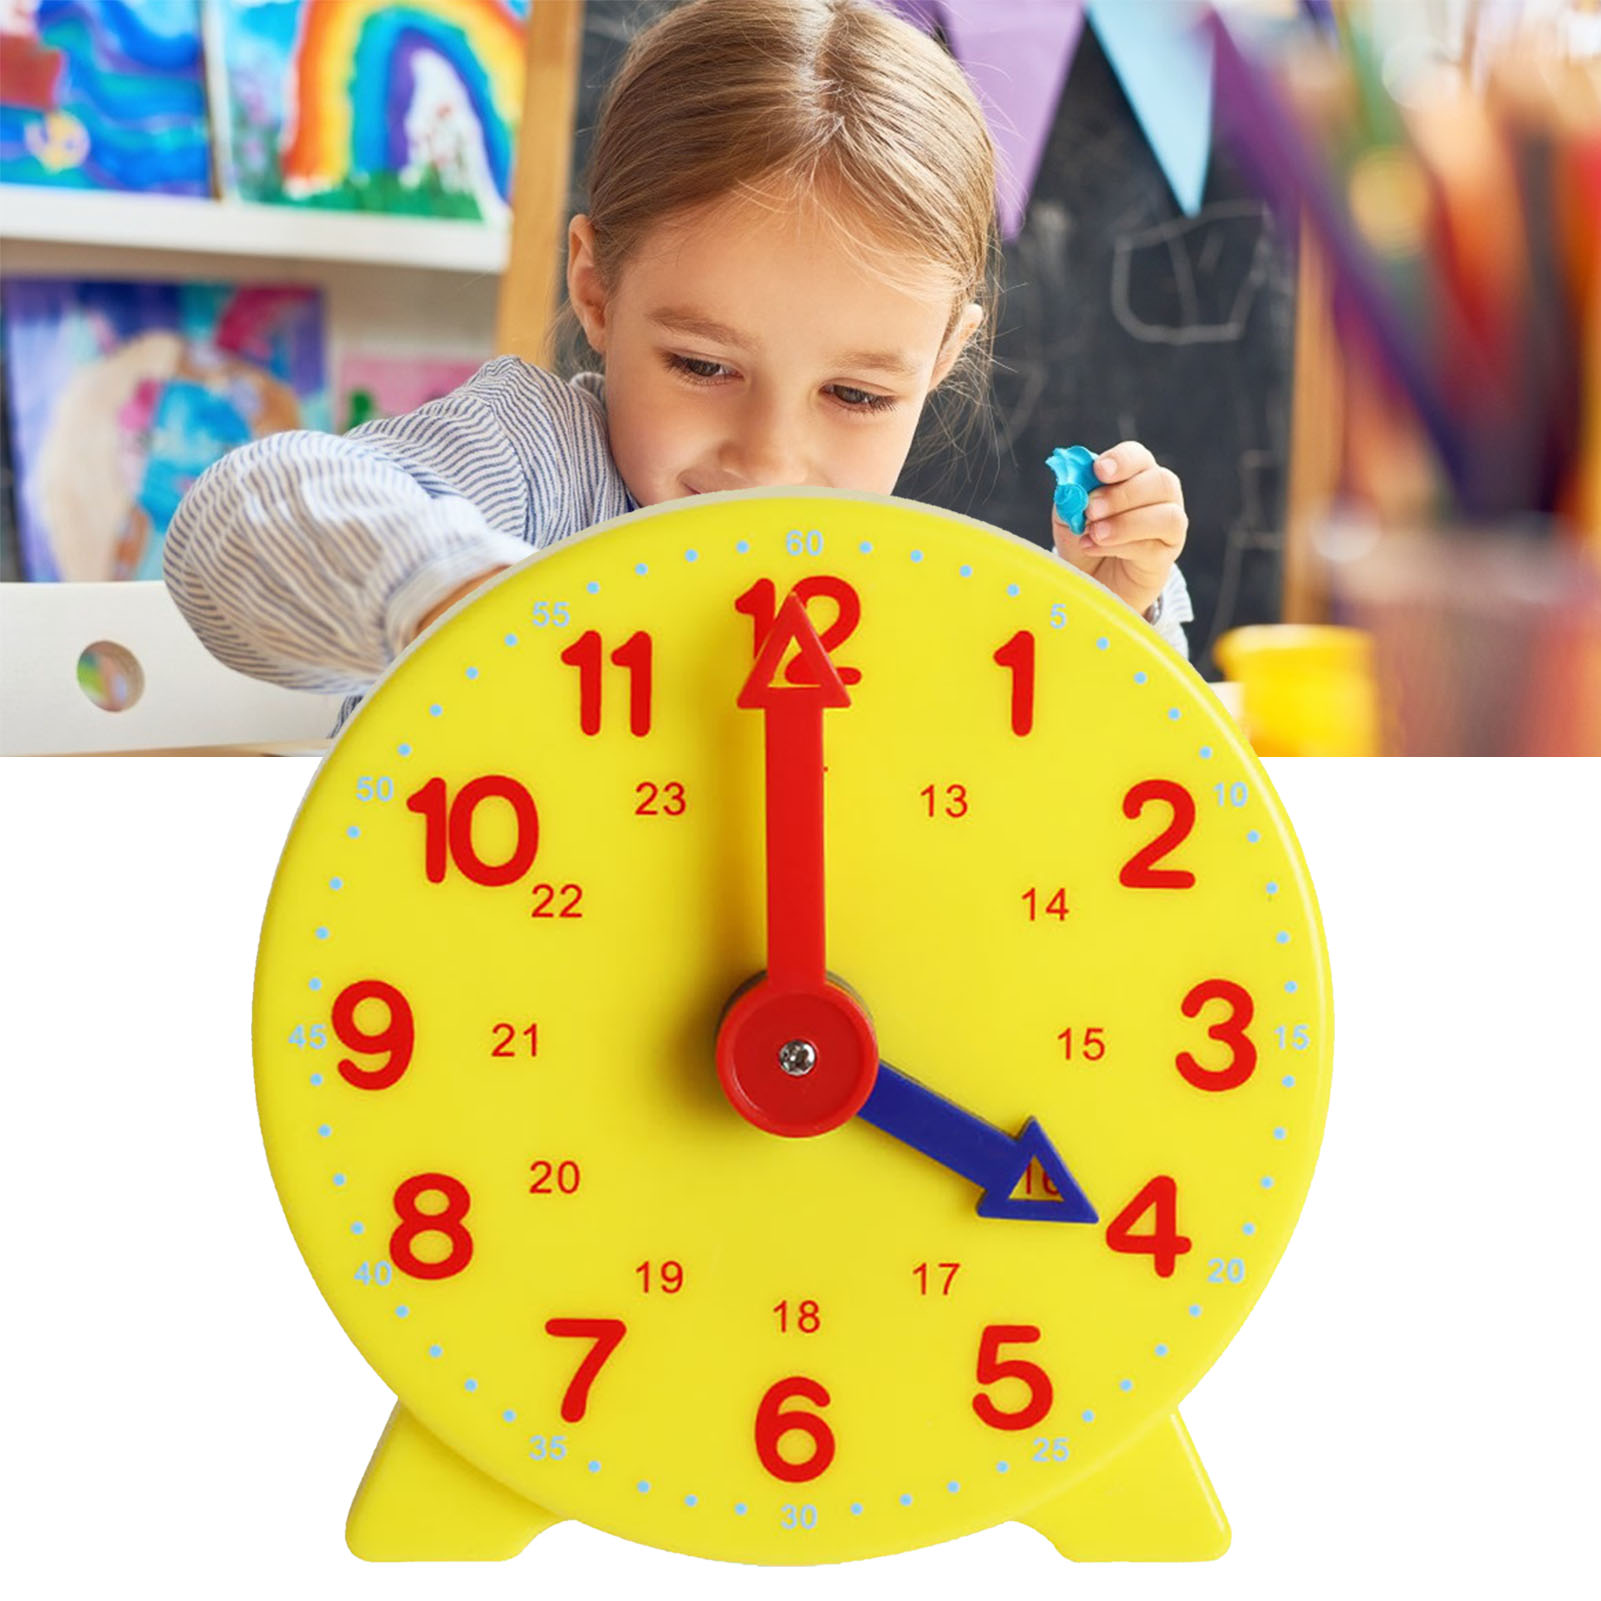 VEAREAR 10cm Plastic Clock Model Early Education Learning Kids Children Toy - image 3 of 6